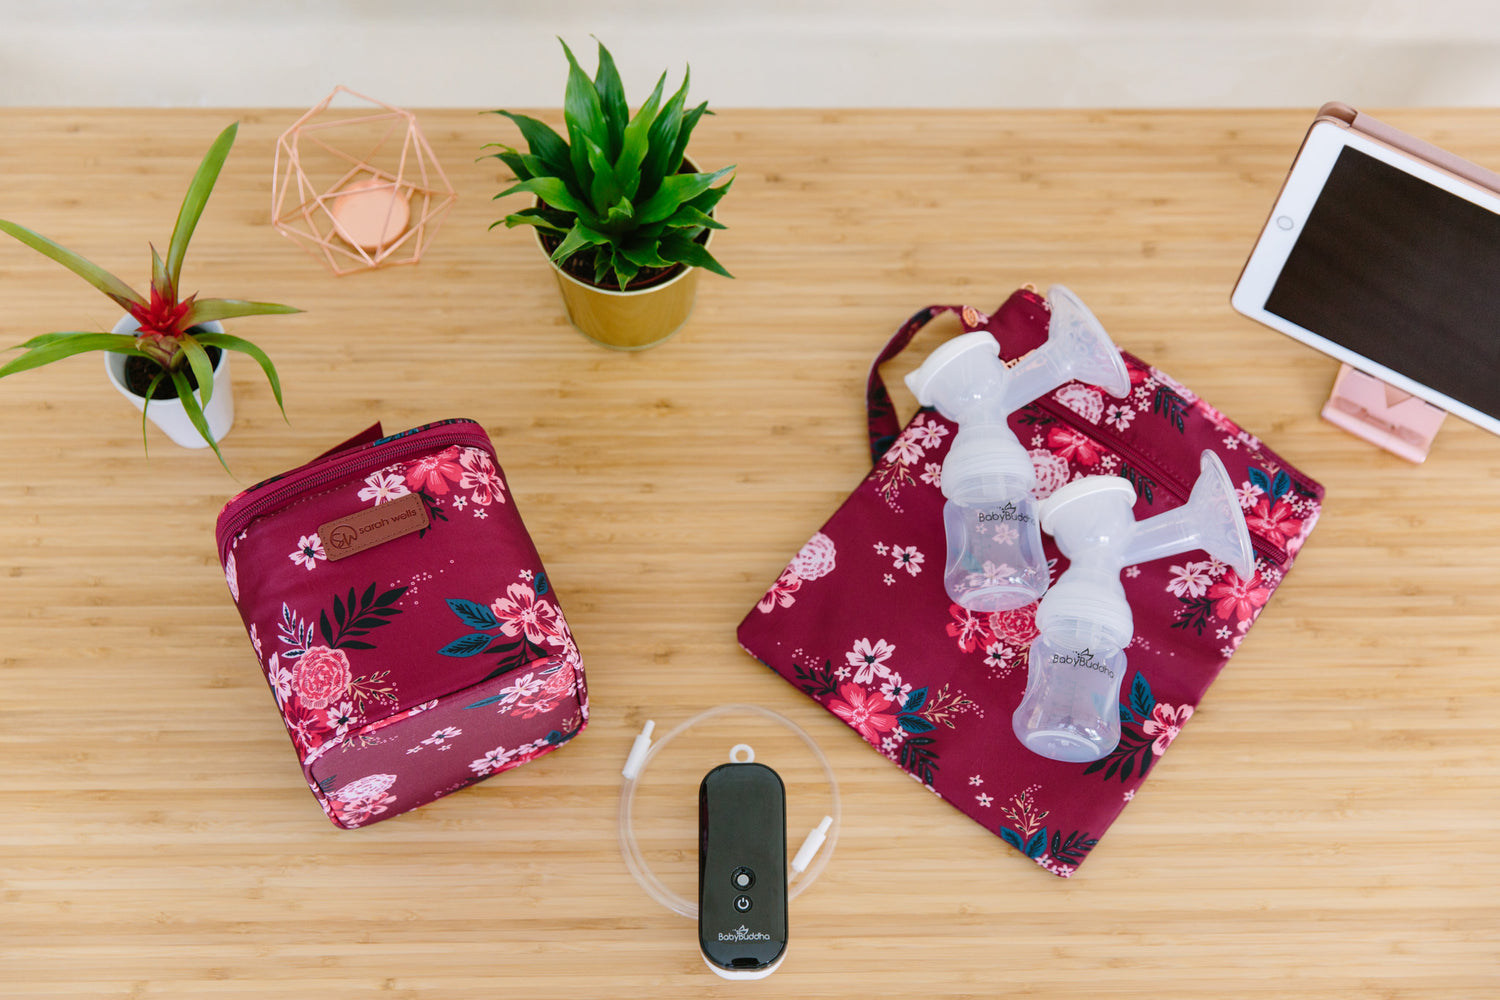 Cold Gold (Berry Bloom) / Breast Pump Bags &amp; Accessories from Sarah Wells